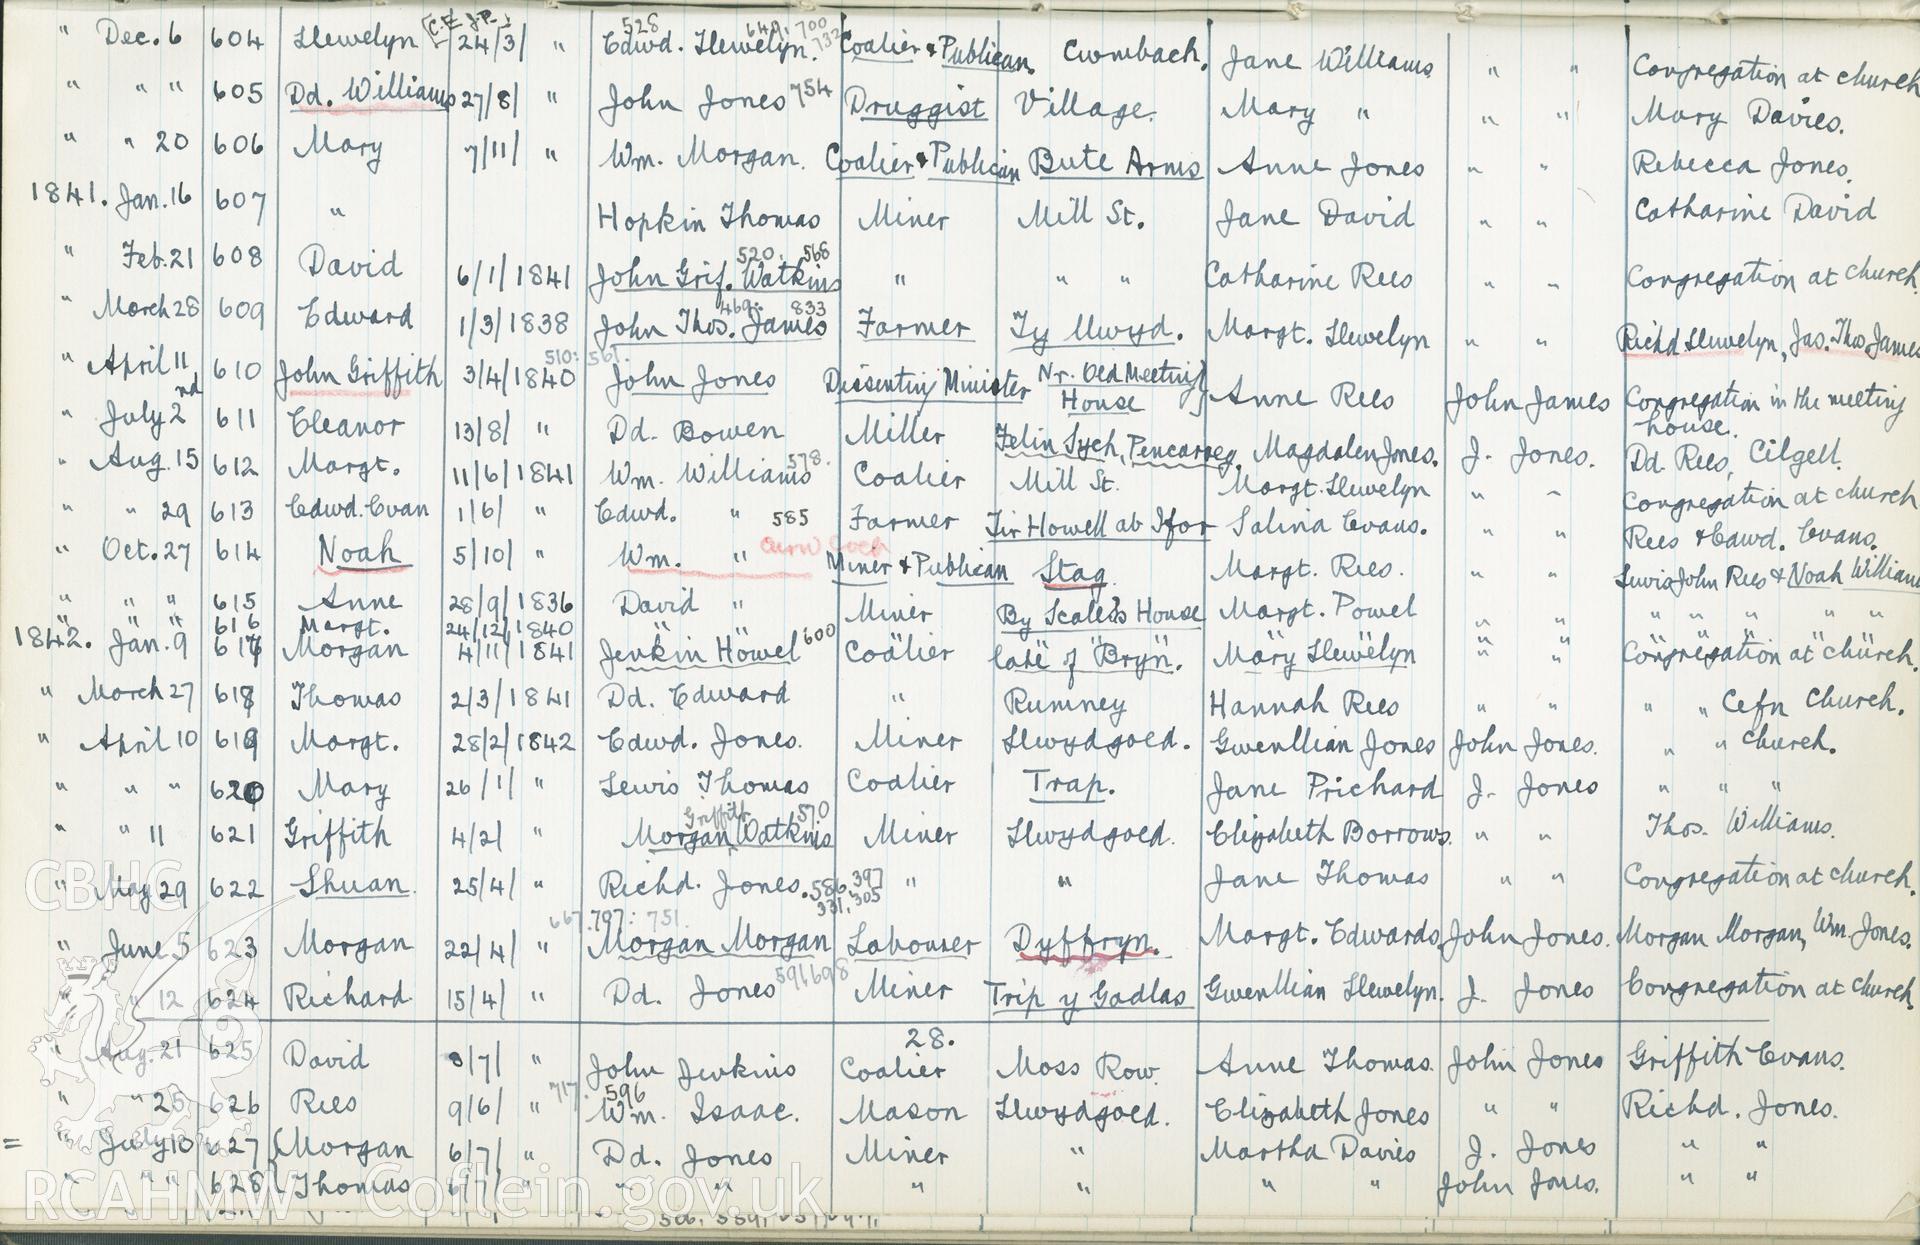 "Baptism Registered" book for Hen Dy Cwrdd, made between April 19th and 28th, 1941, by W. W. Price. Page listing baptisms from 6th December 1840 to 10th July 1842. Donated to the RCAHMW as part of the Digital Dissent Project.